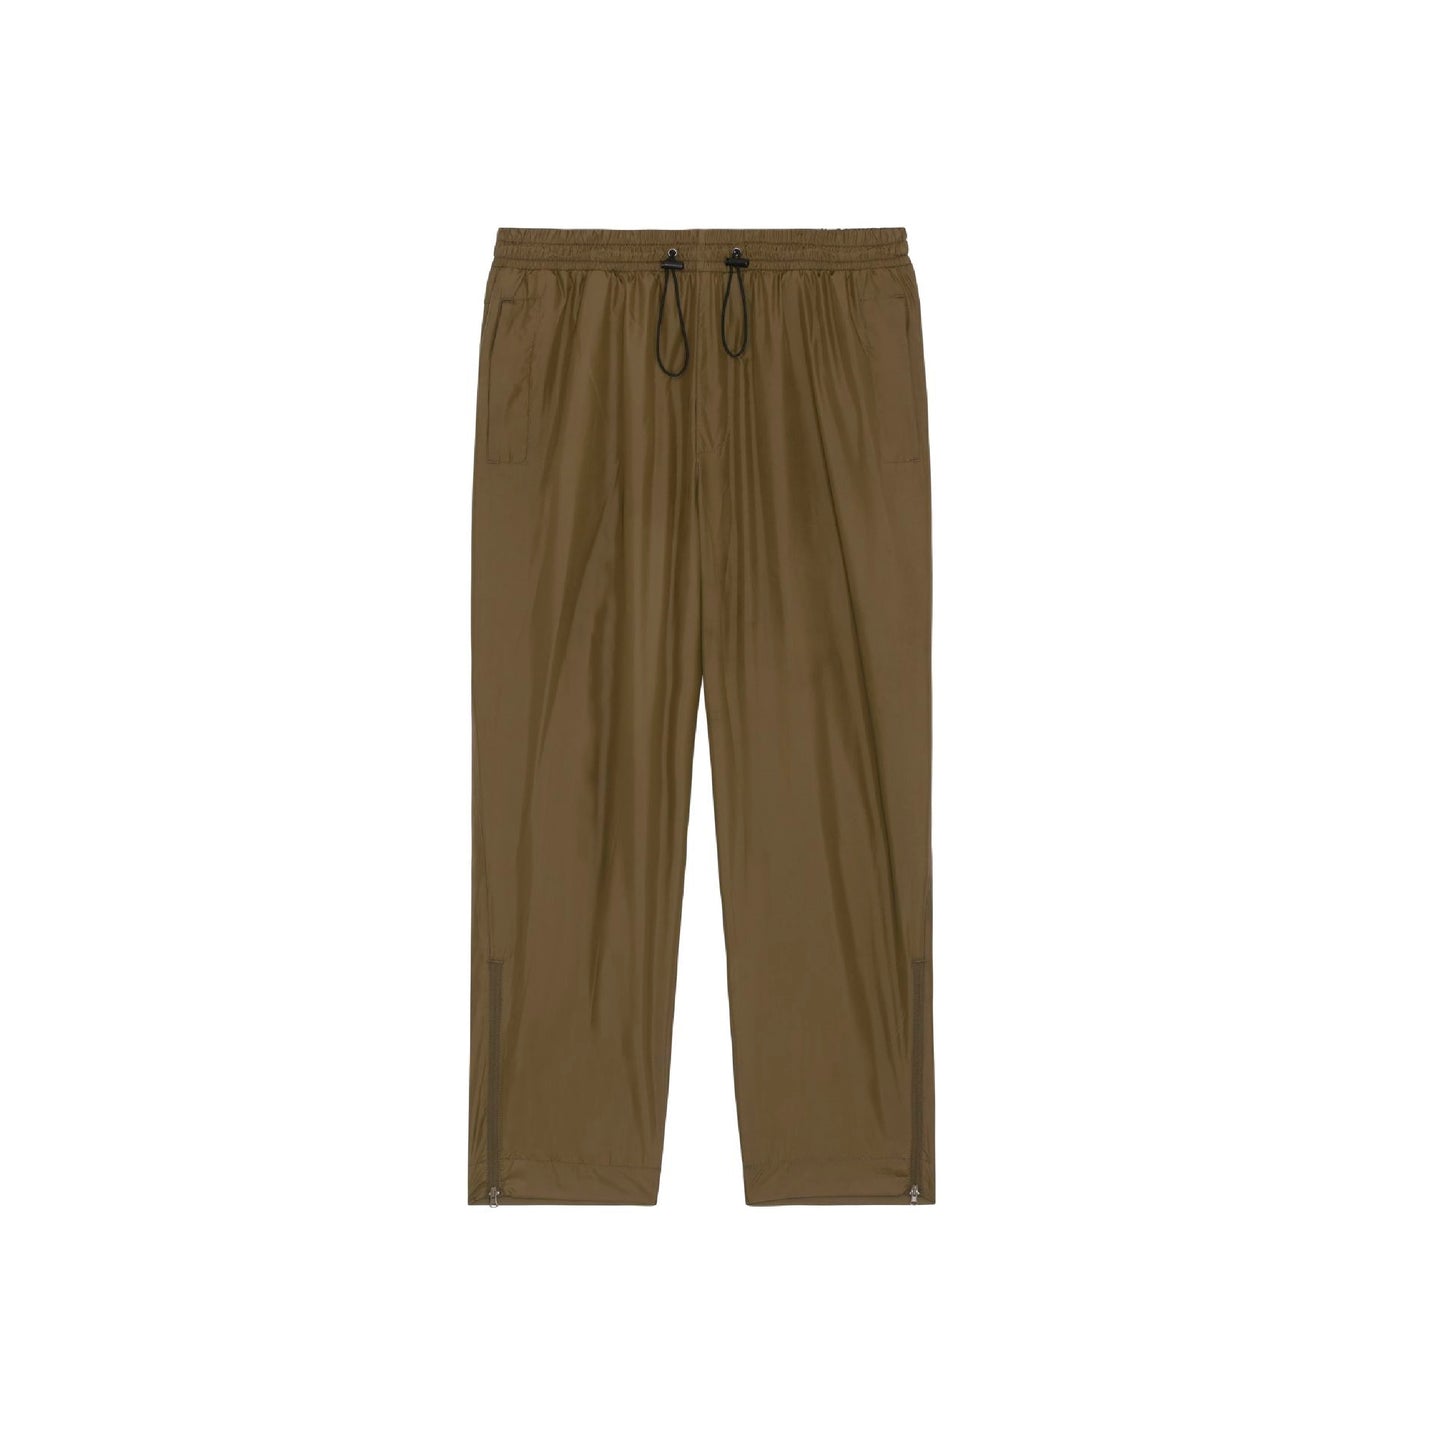 The Multifunctional Trousers